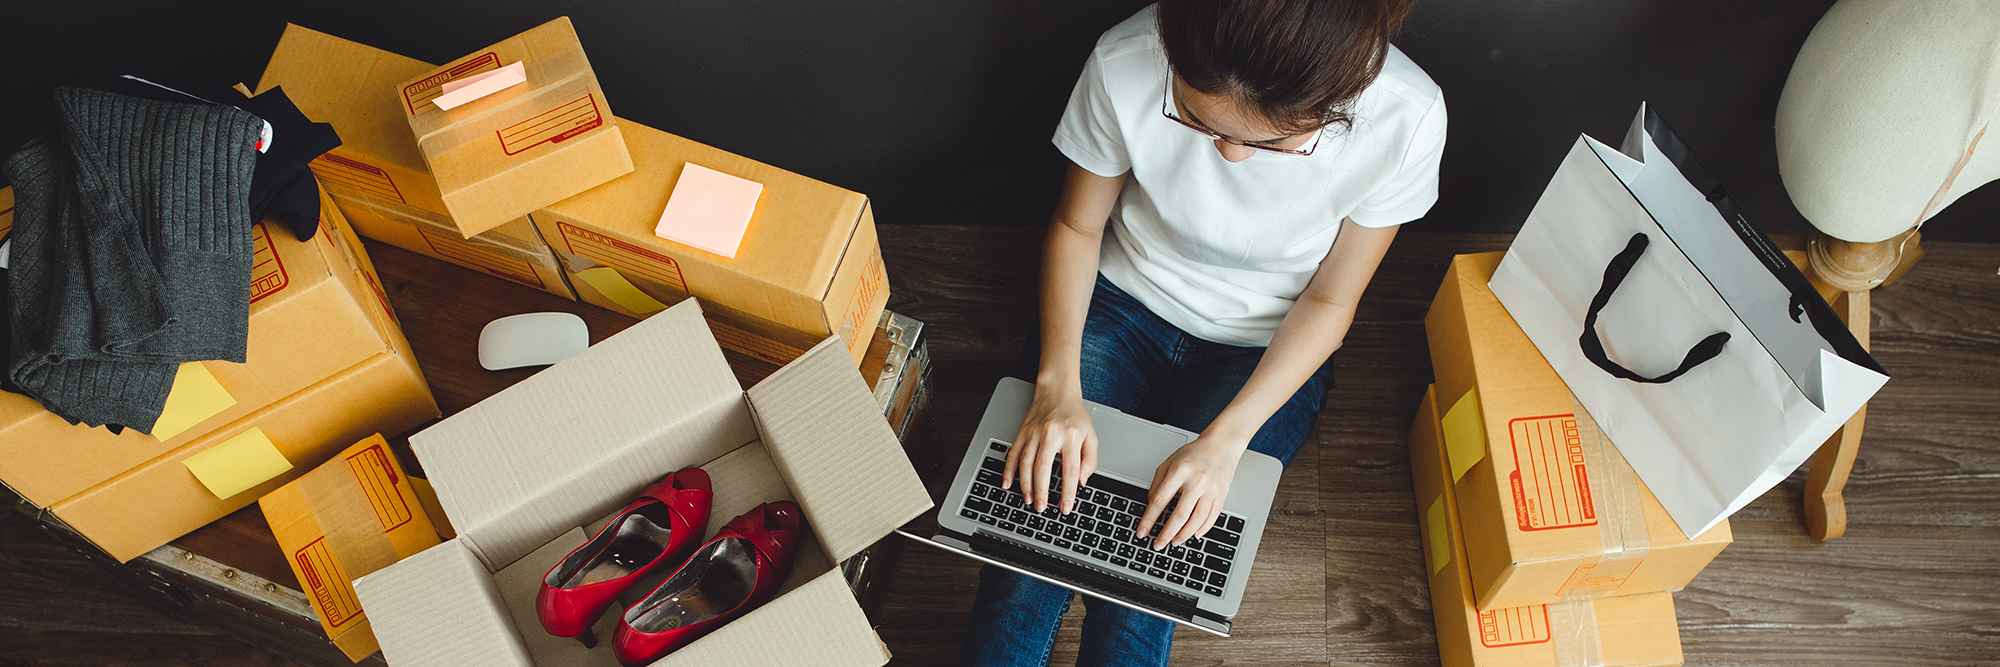 Woman sitting on the floor typing on a laptop surrounded by boxes | Digital Wings | Safe online shopping